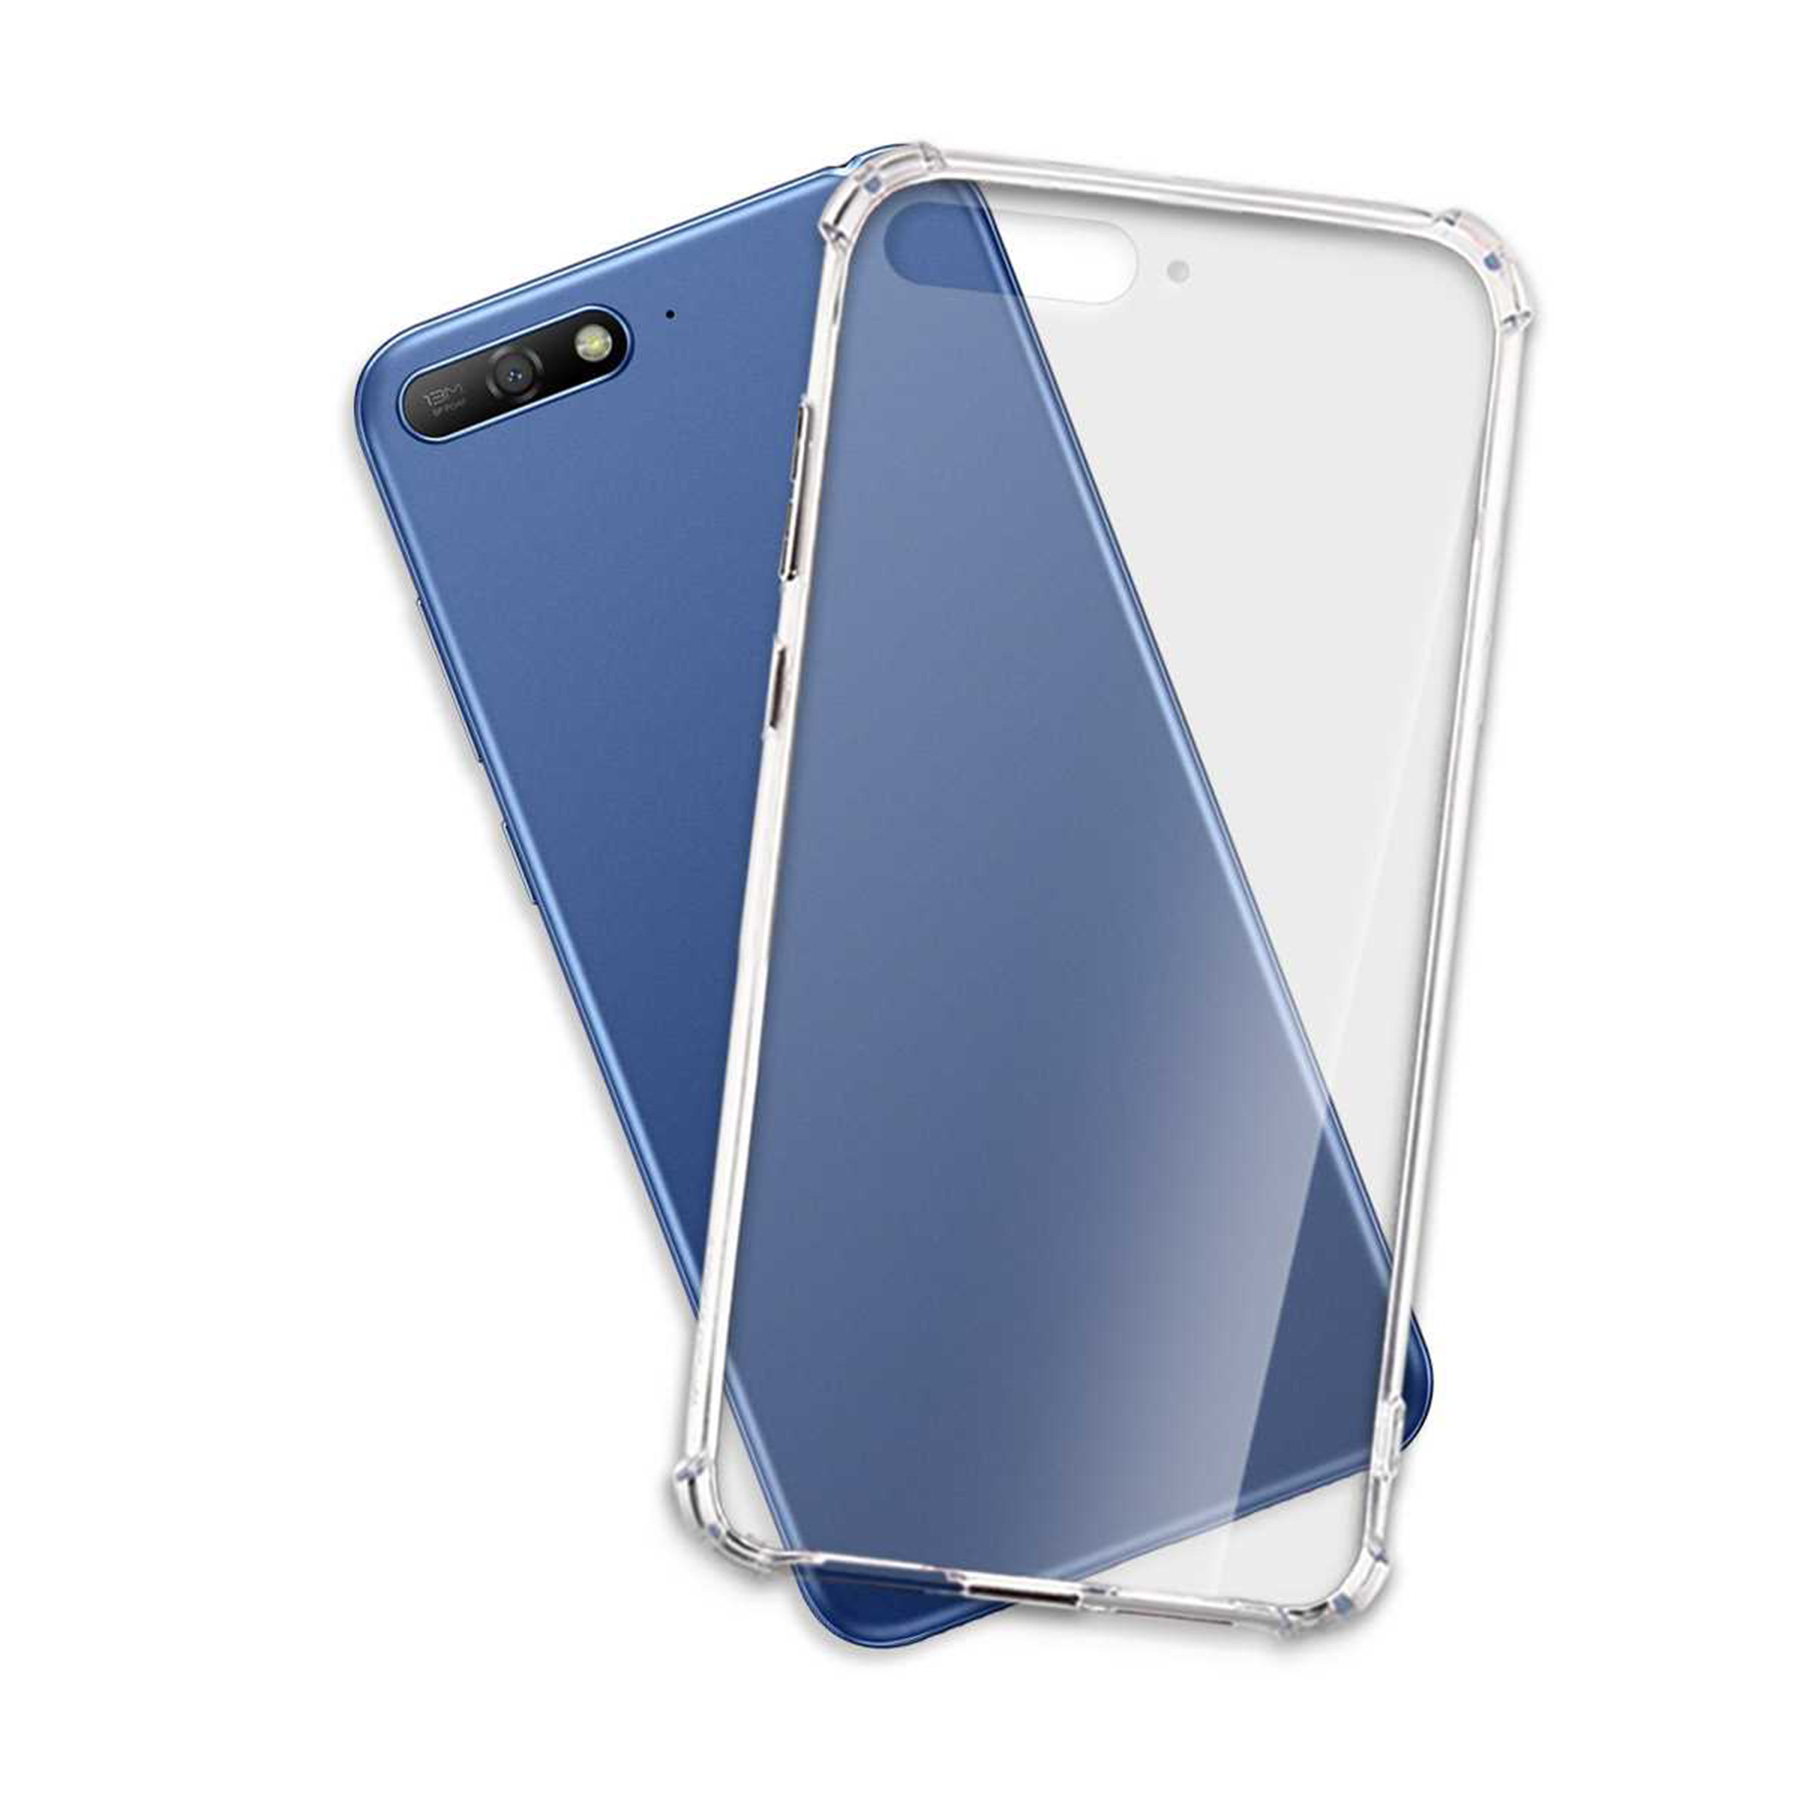 MTB MORE Backcover, 2018, ENERGY Y6 Clear Huawei, Transparent Armor Case,